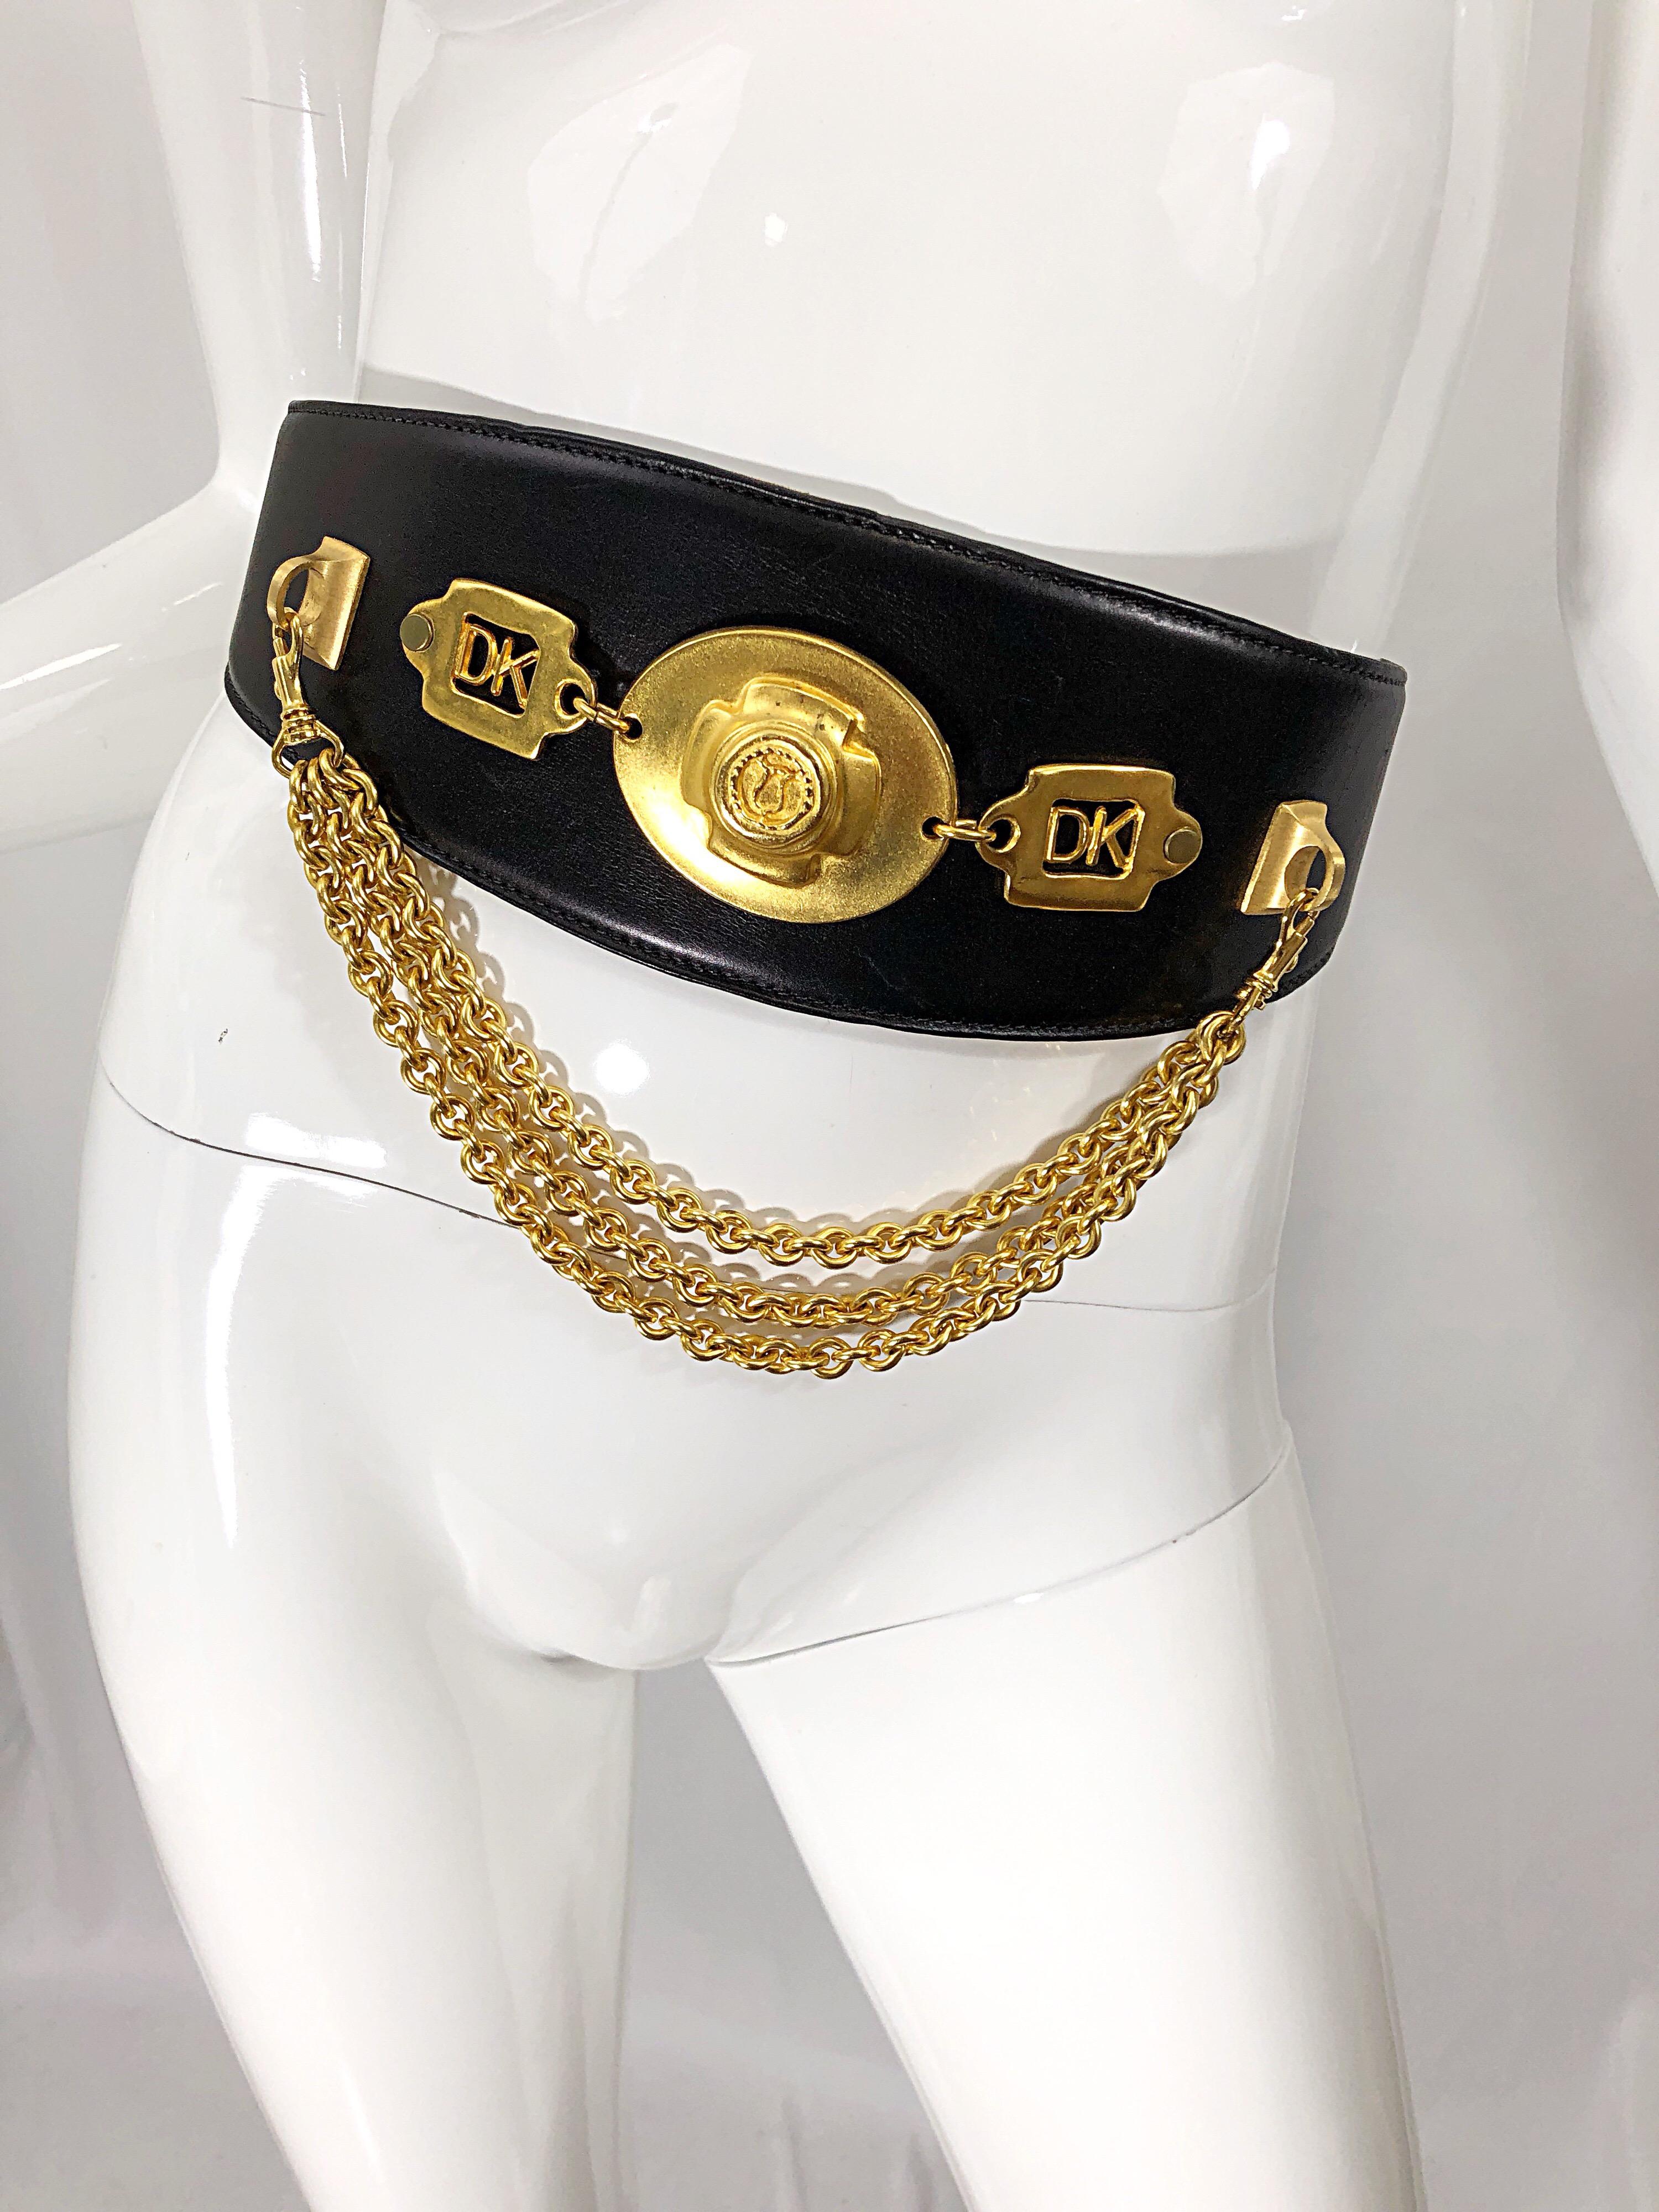 Stylish vintage DONNA KARAN black leather belt with removable gold chains. Gold plaque with the DK logo on each side. The perfect piece to really make an outfit pop! Great with a dress, or over a blouse or tunic. In great condition. 
Made in